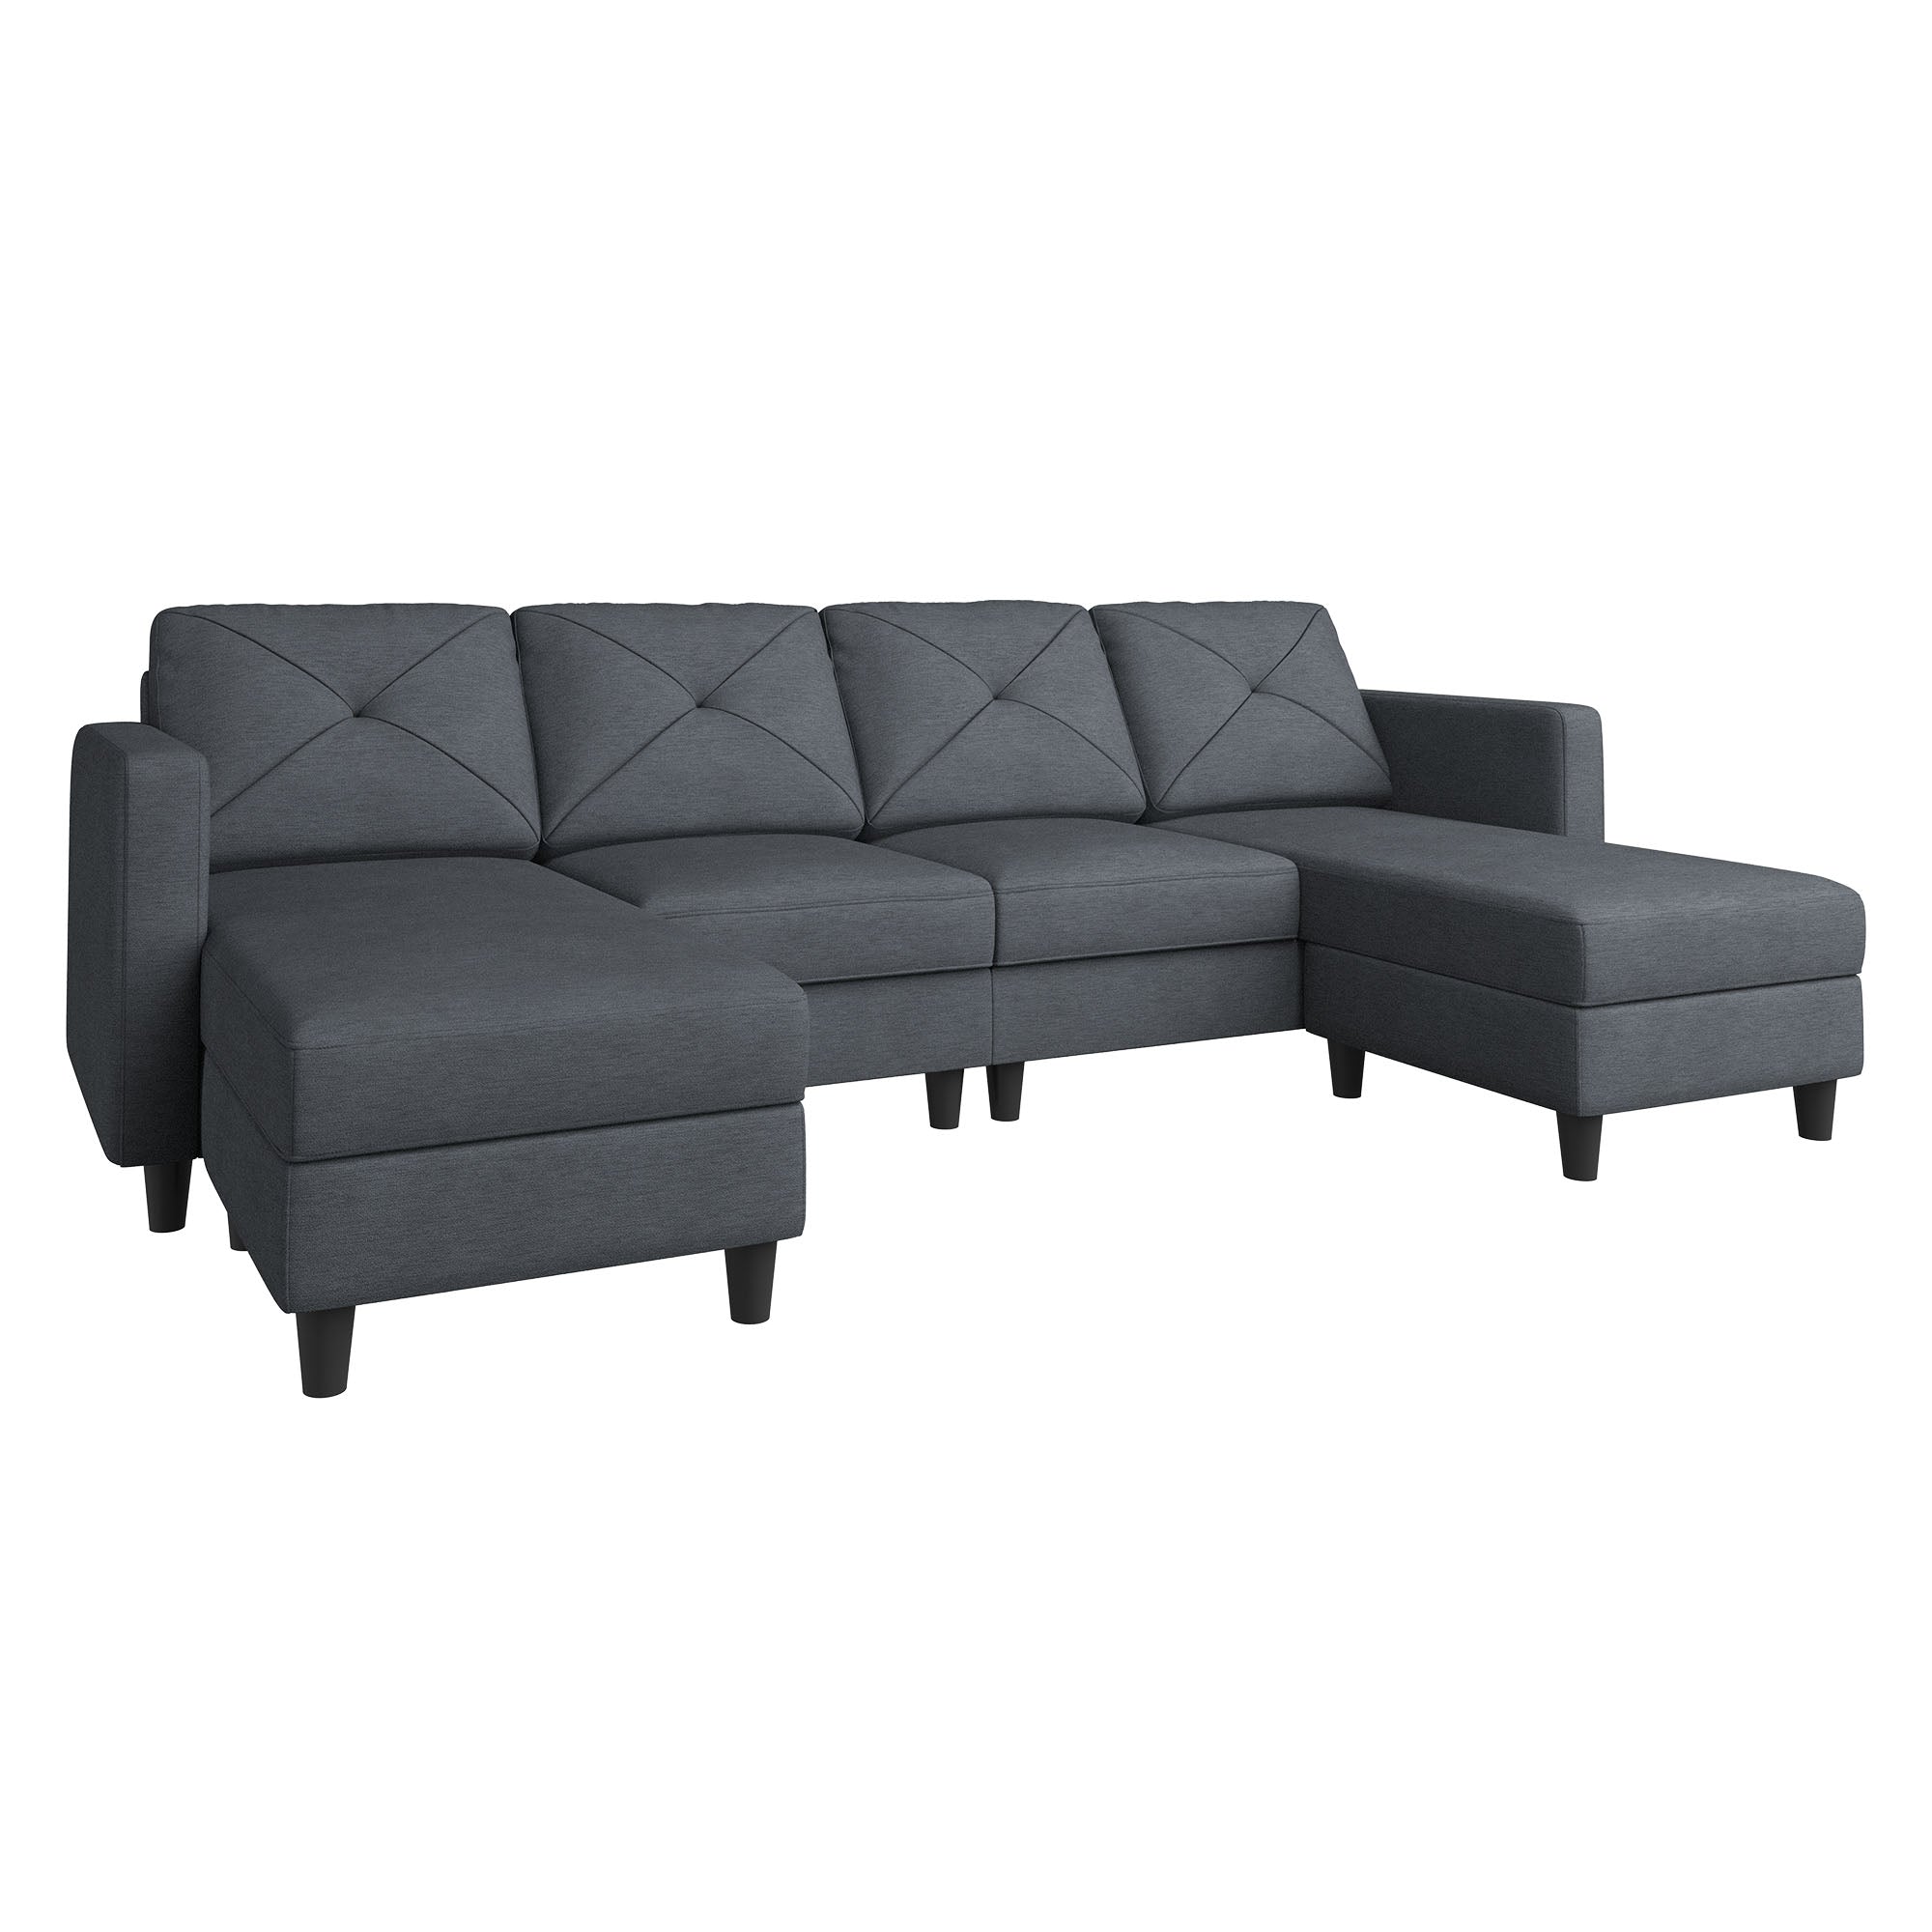 HONBAY 4-Piece Polyester Convertible Sectional